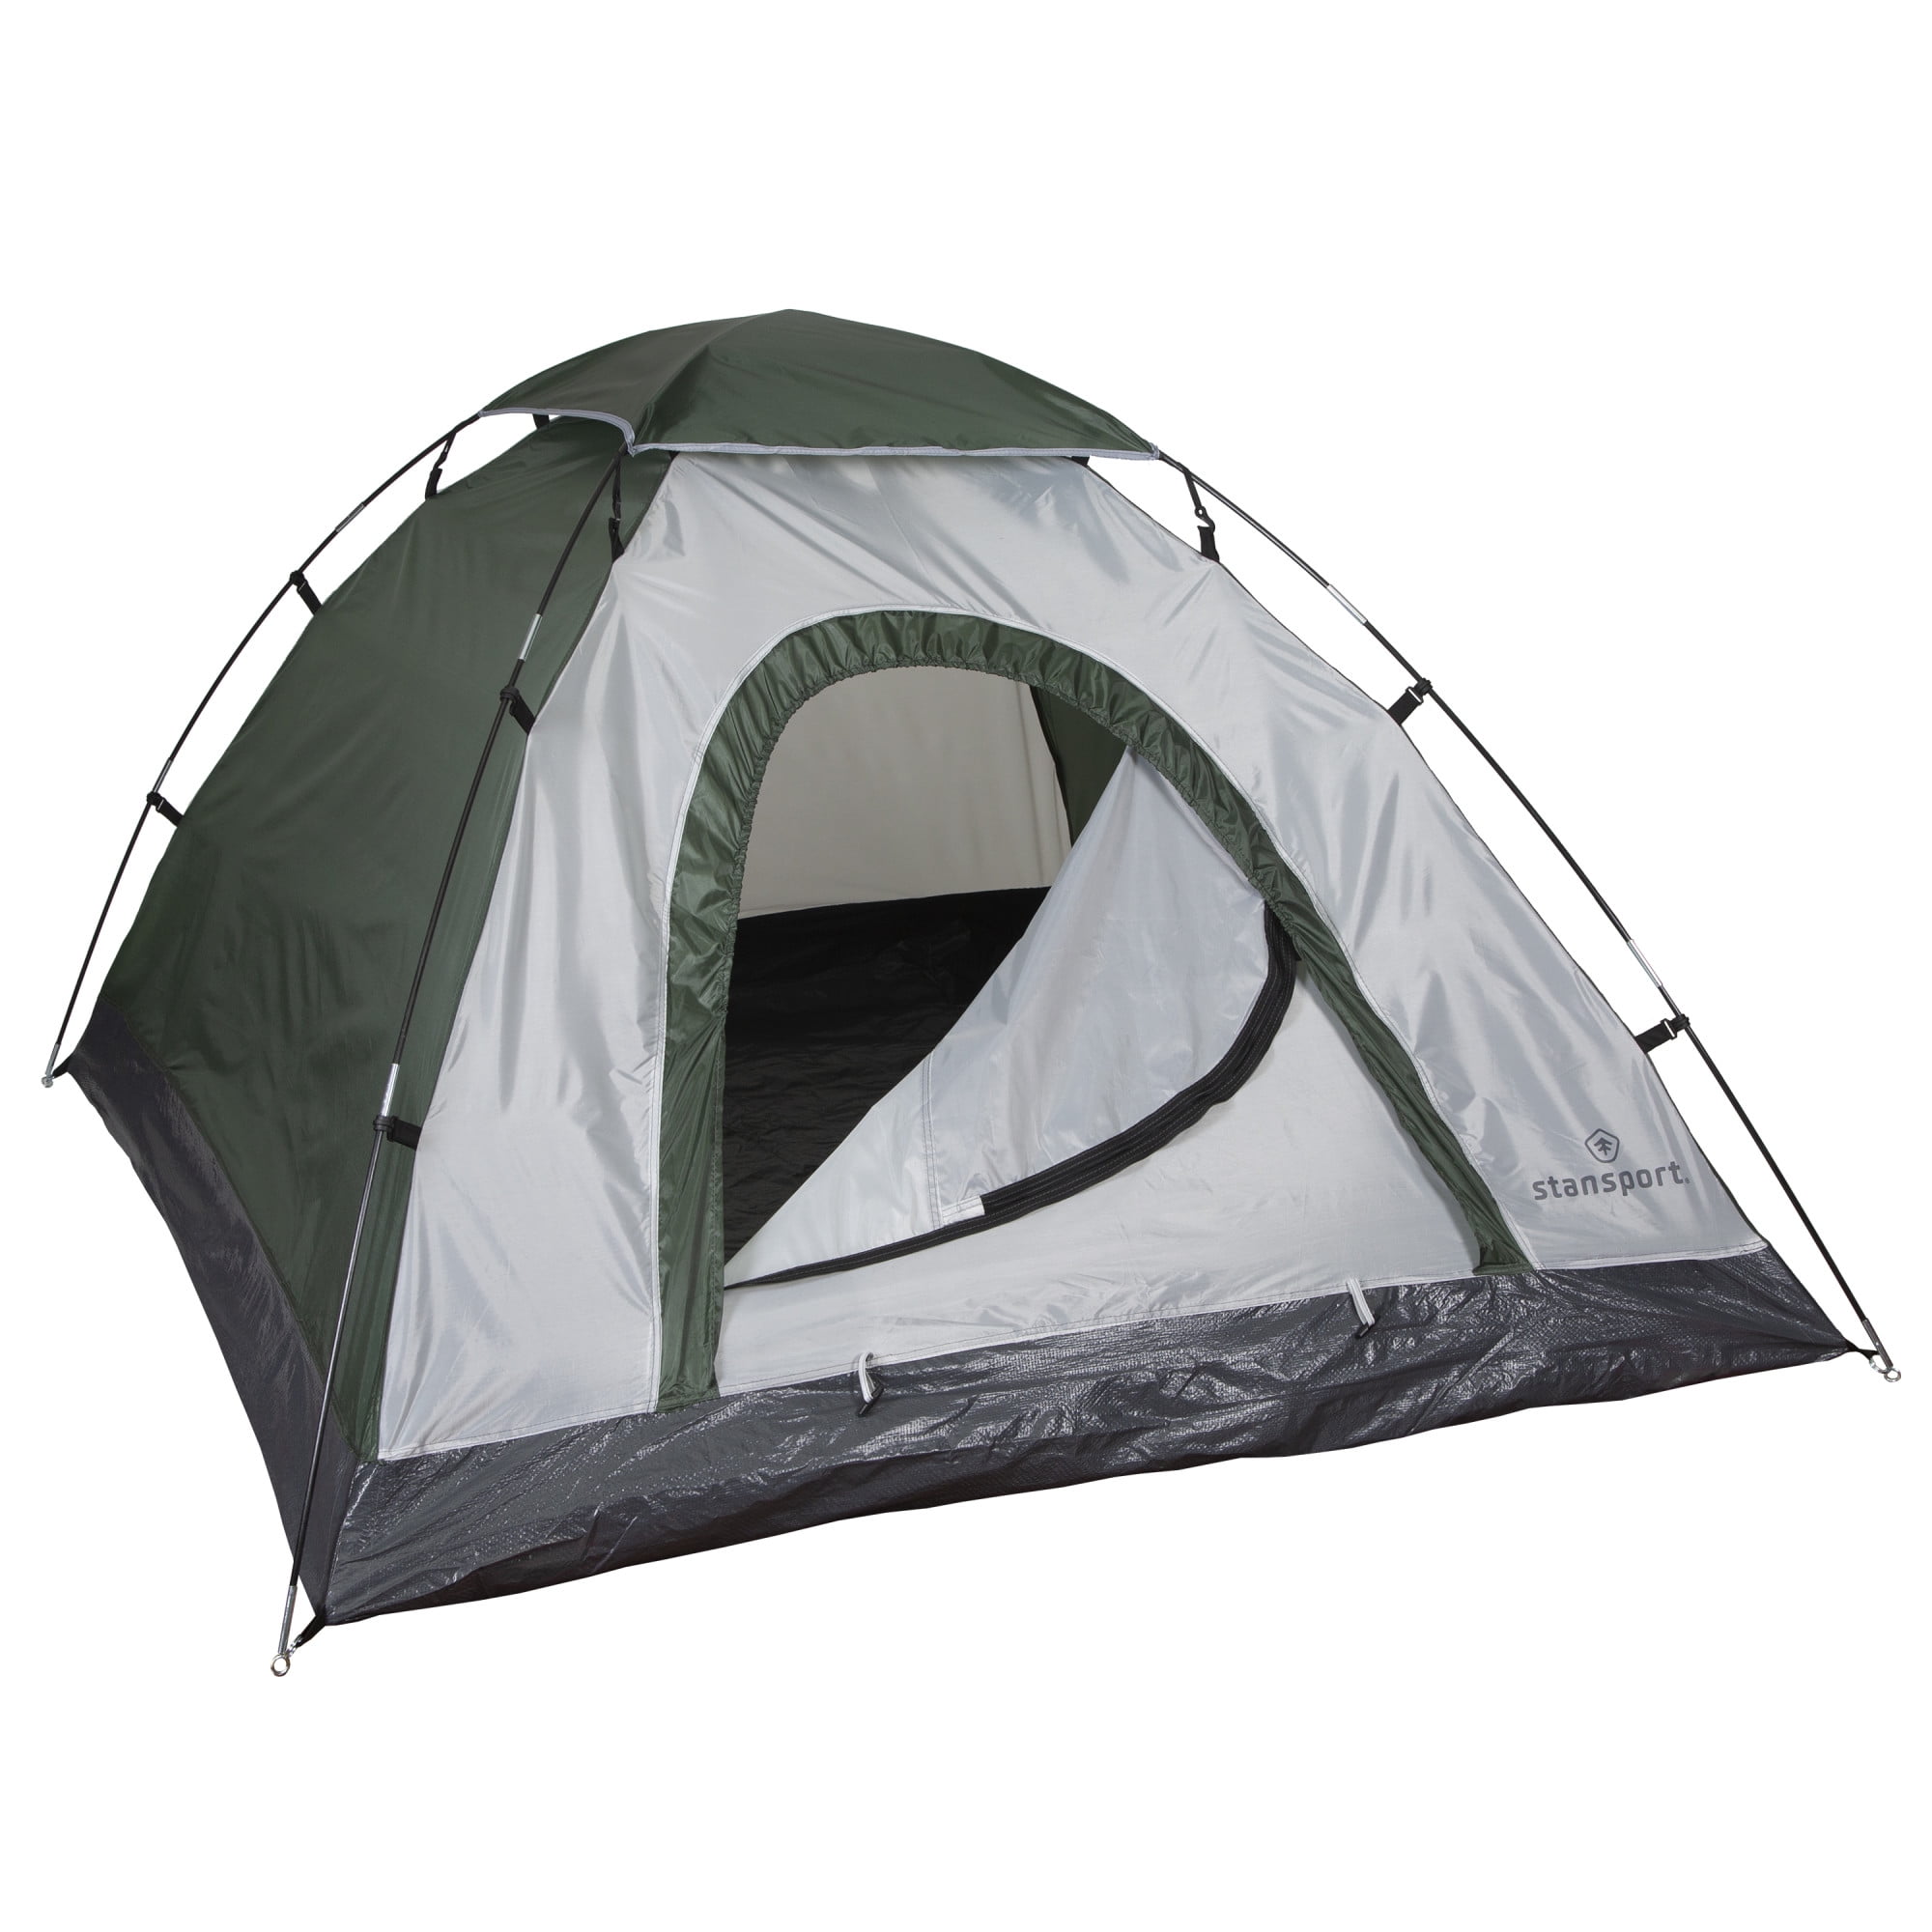 Stansport Hunter Series Hunter Buddy 2 Pole Dome Tent Forest Green/Tan, 5-Feet 